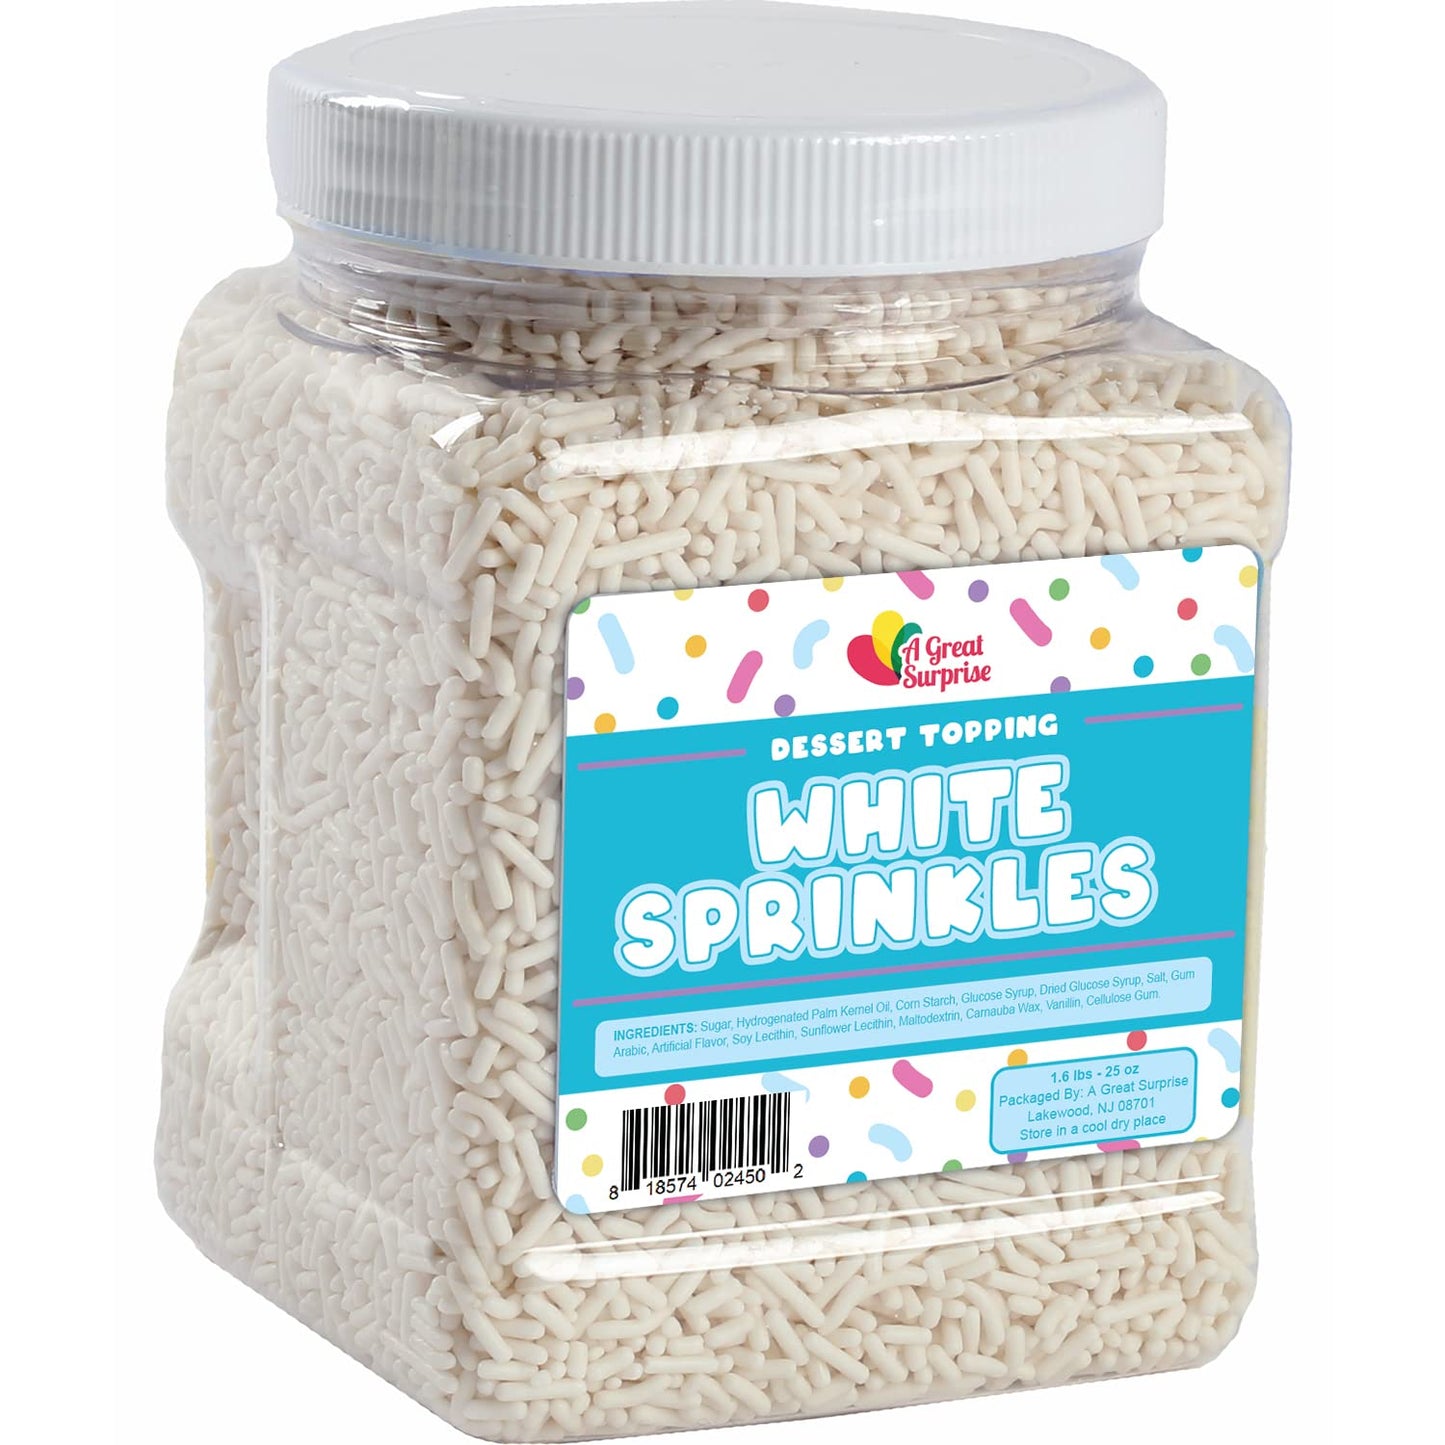 White Sprinkles Bulk - 1.6 LB - Mothers Day Sprinkles - Jimmies in Resealable Container - Sprinkles for Cake Decorating, Cupcakes, Cookie Baking and More